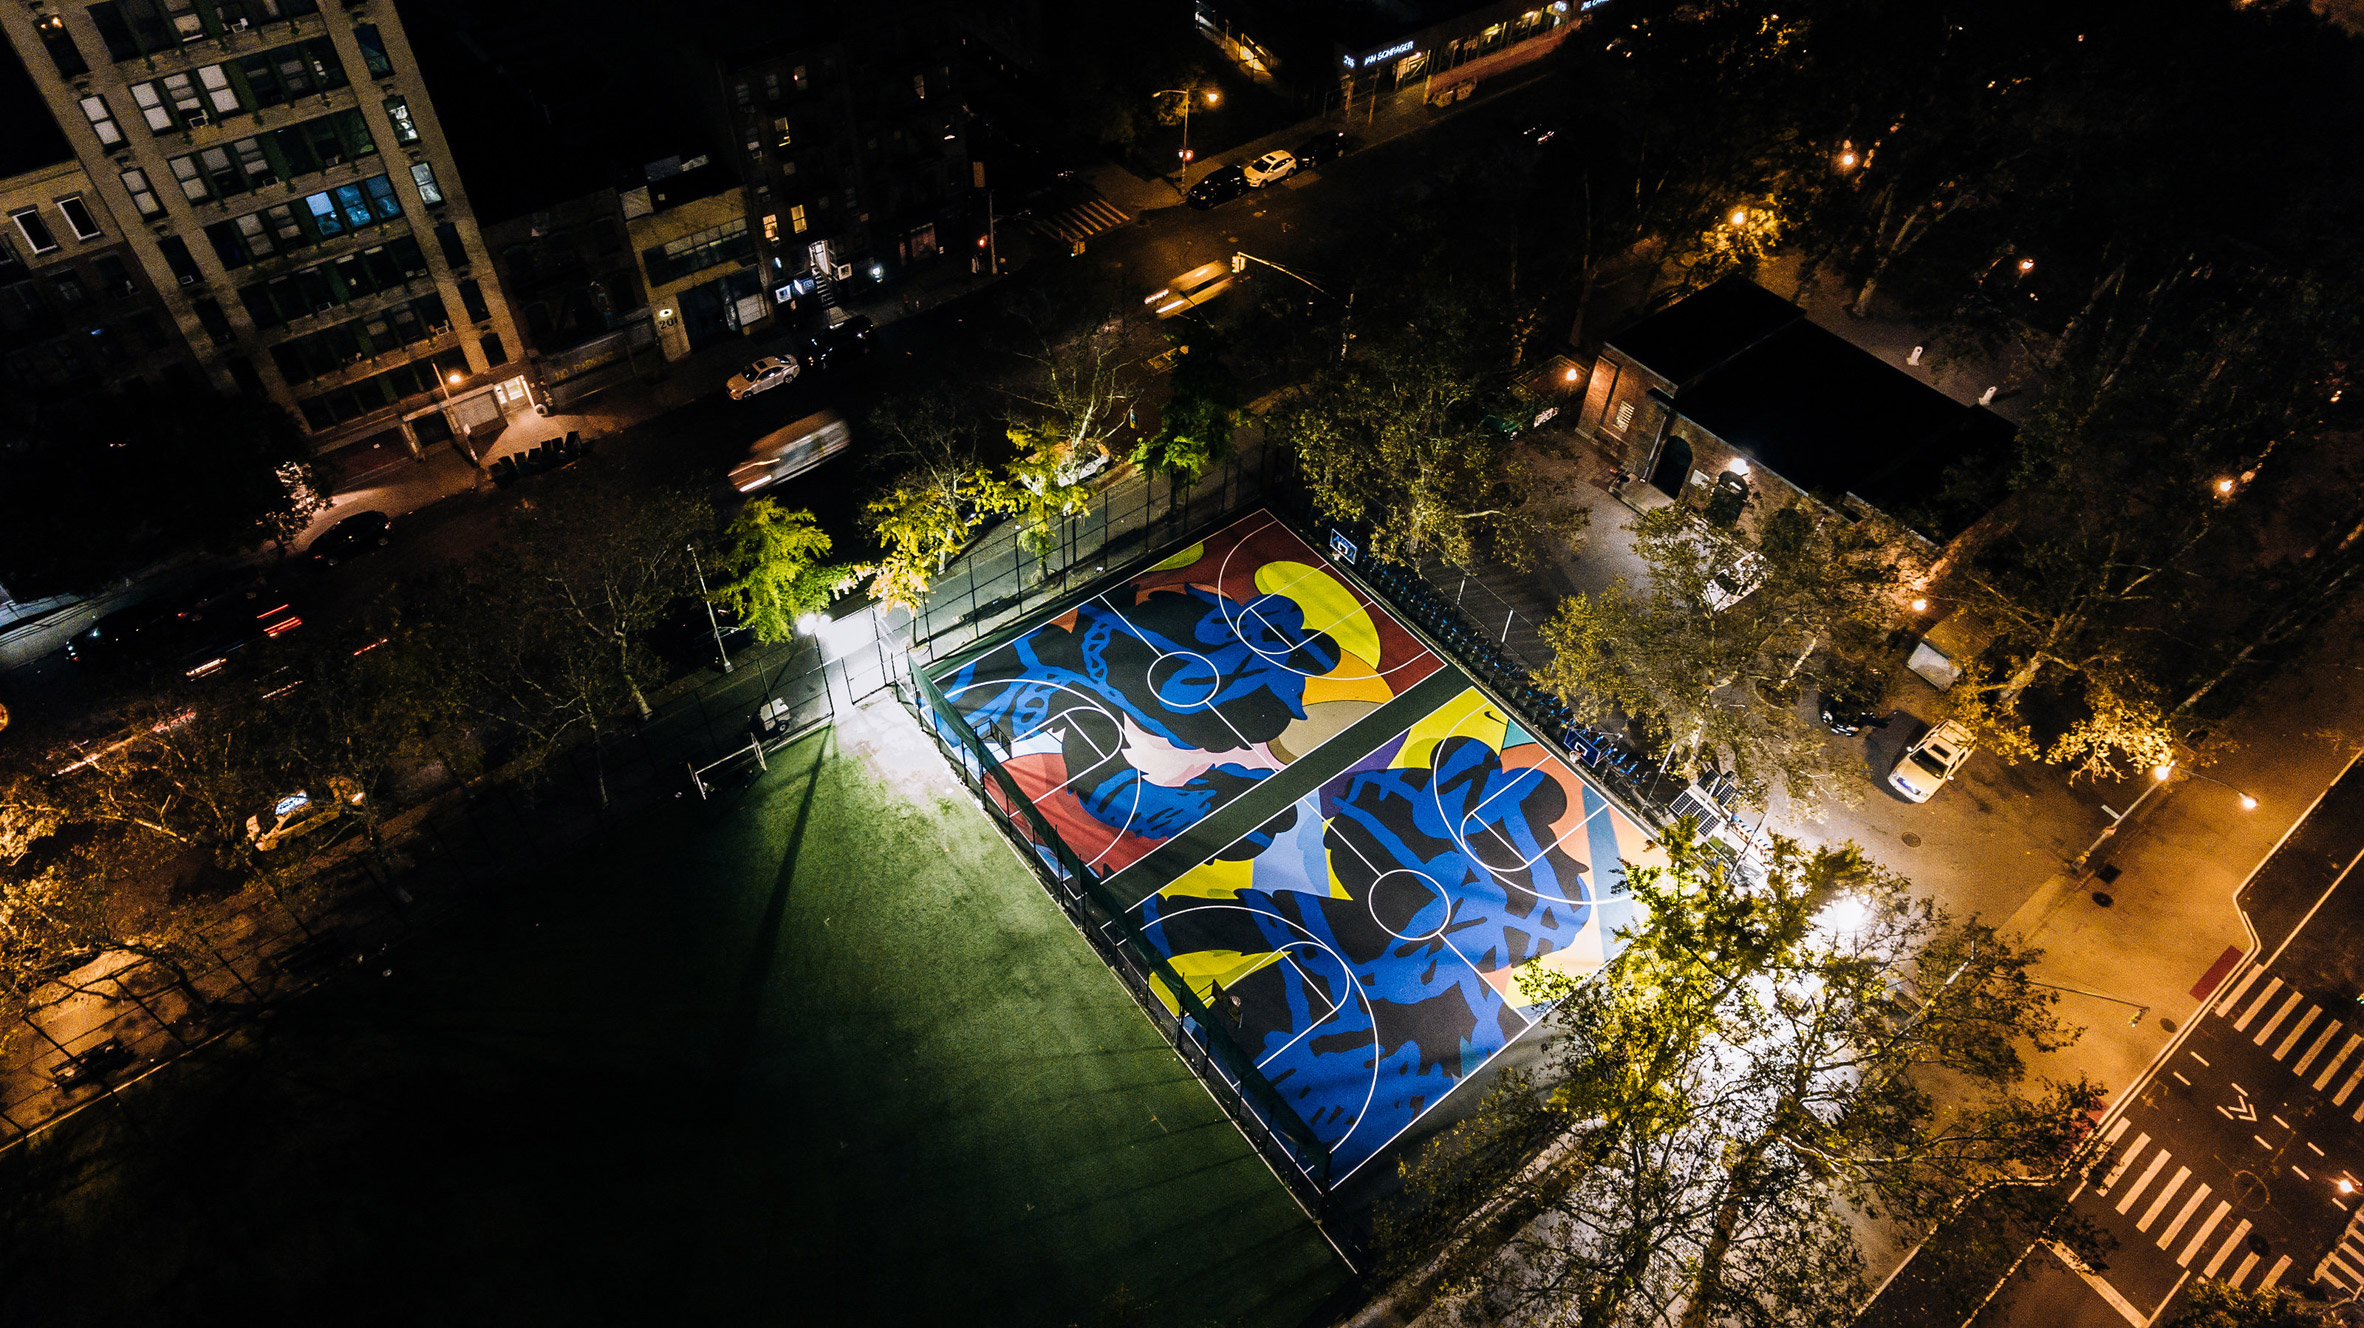 Kaws covers New York basketball courts in colourful murals